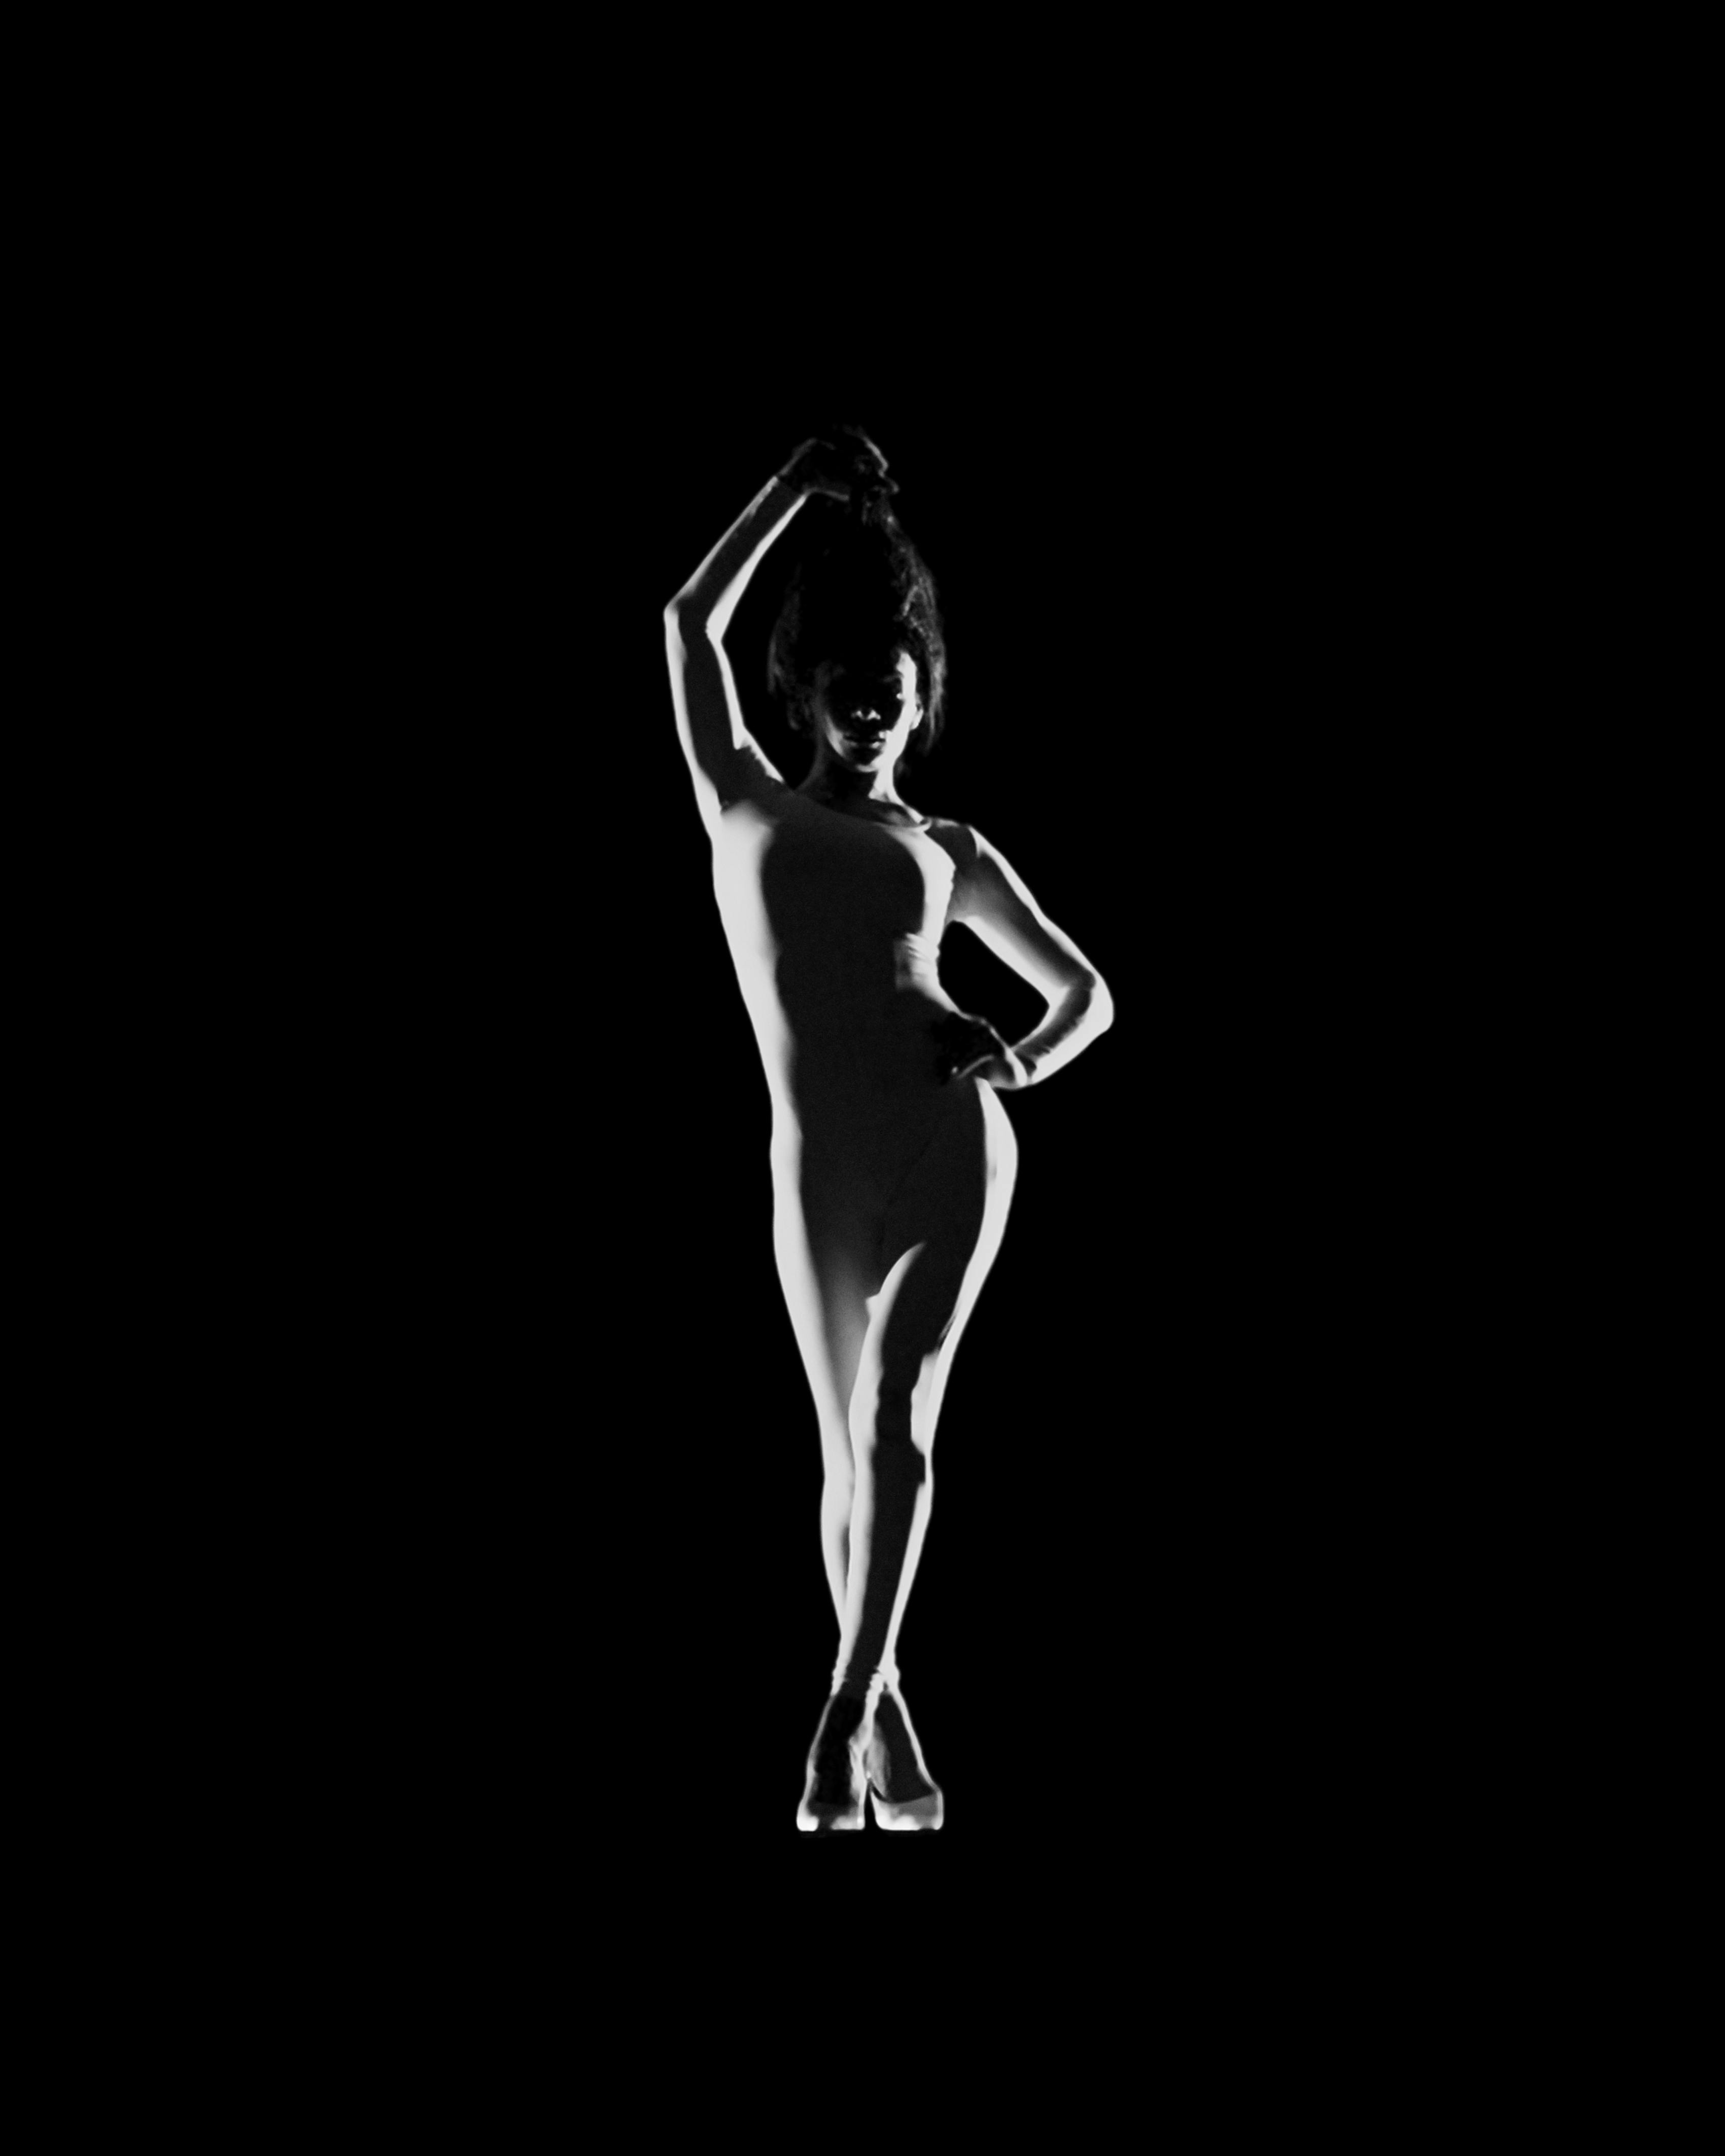 A black and white image of a figure wearing a unitard posing with one hand raising their hair above their head. the other on their hip. They are backlit and appear to be glowing on a black backdrop.  